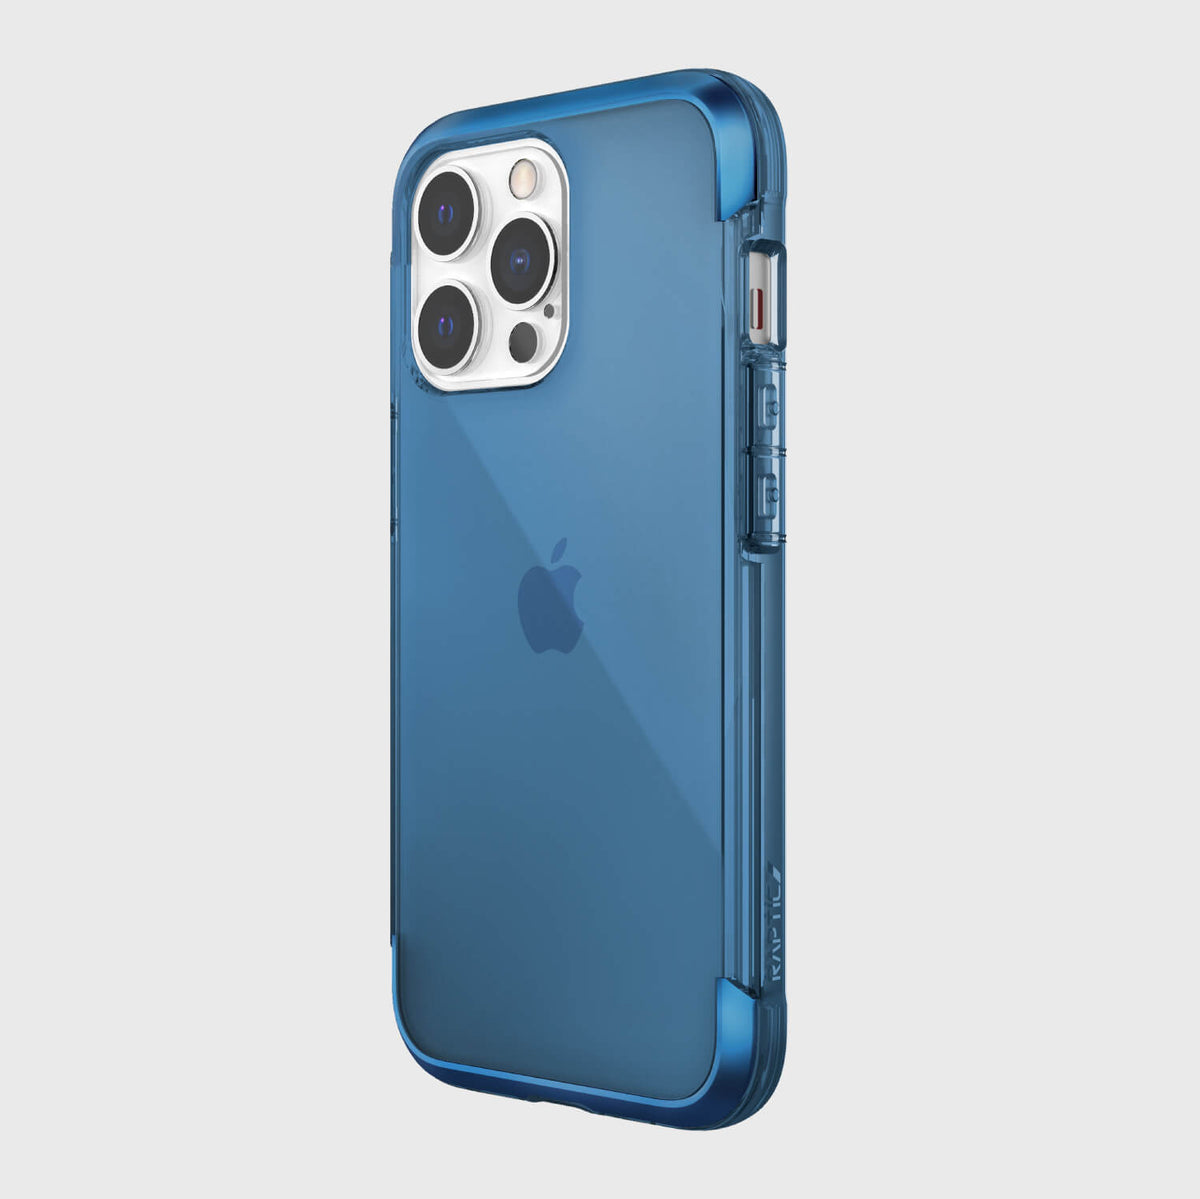 A blue Raptic iPhone 13 Pro Case - AIR with multiple cameras that is drop proof.